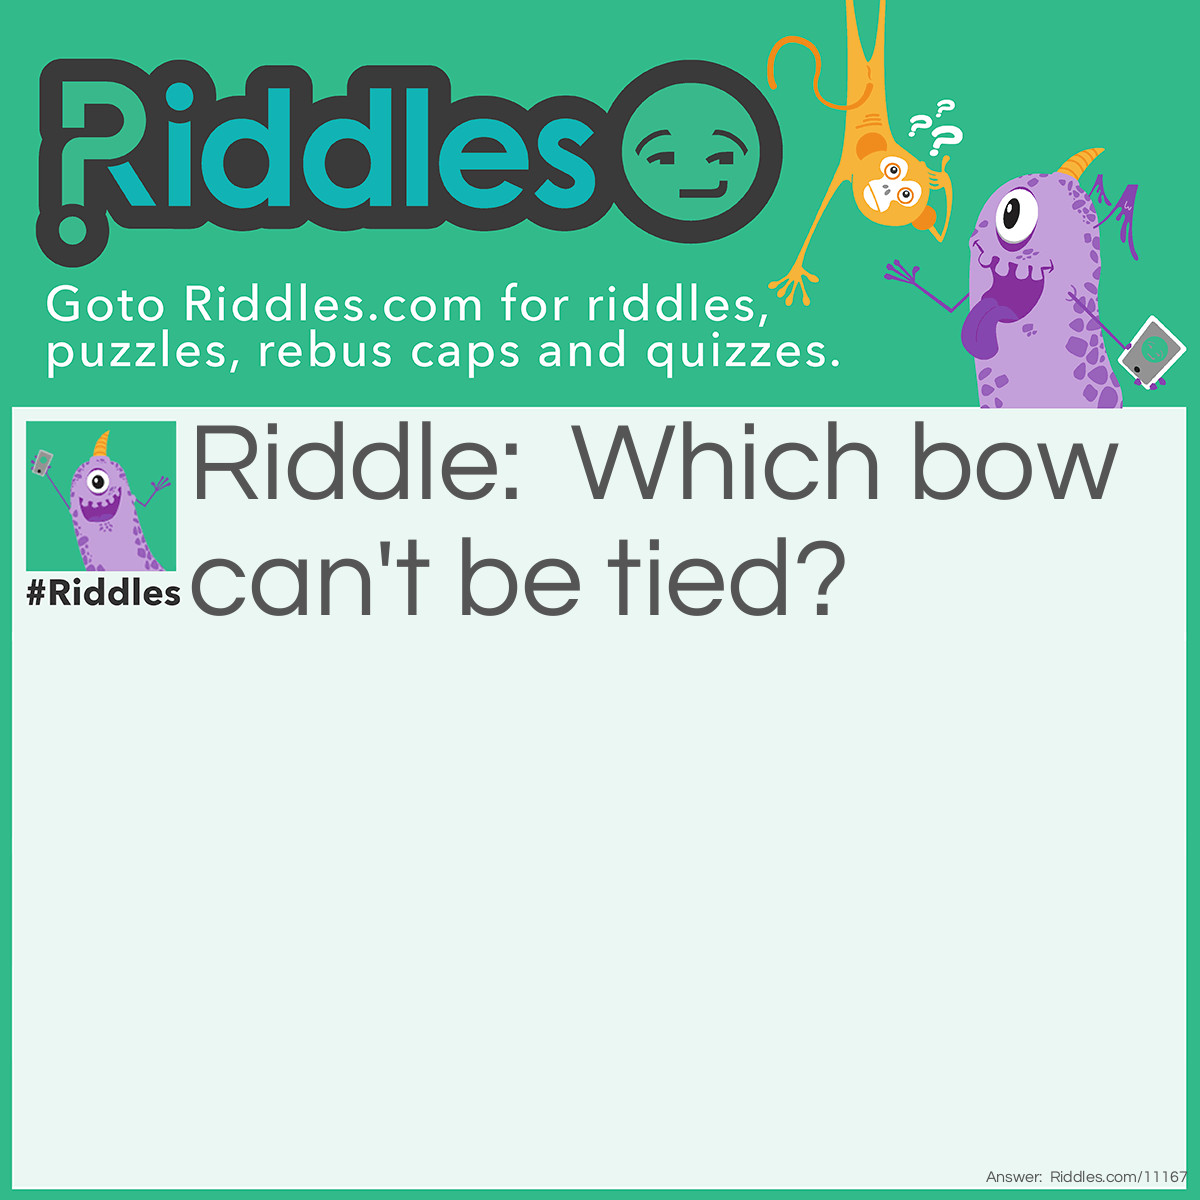 Riddle: Which bow can't be tied? Answer: A rainbow.